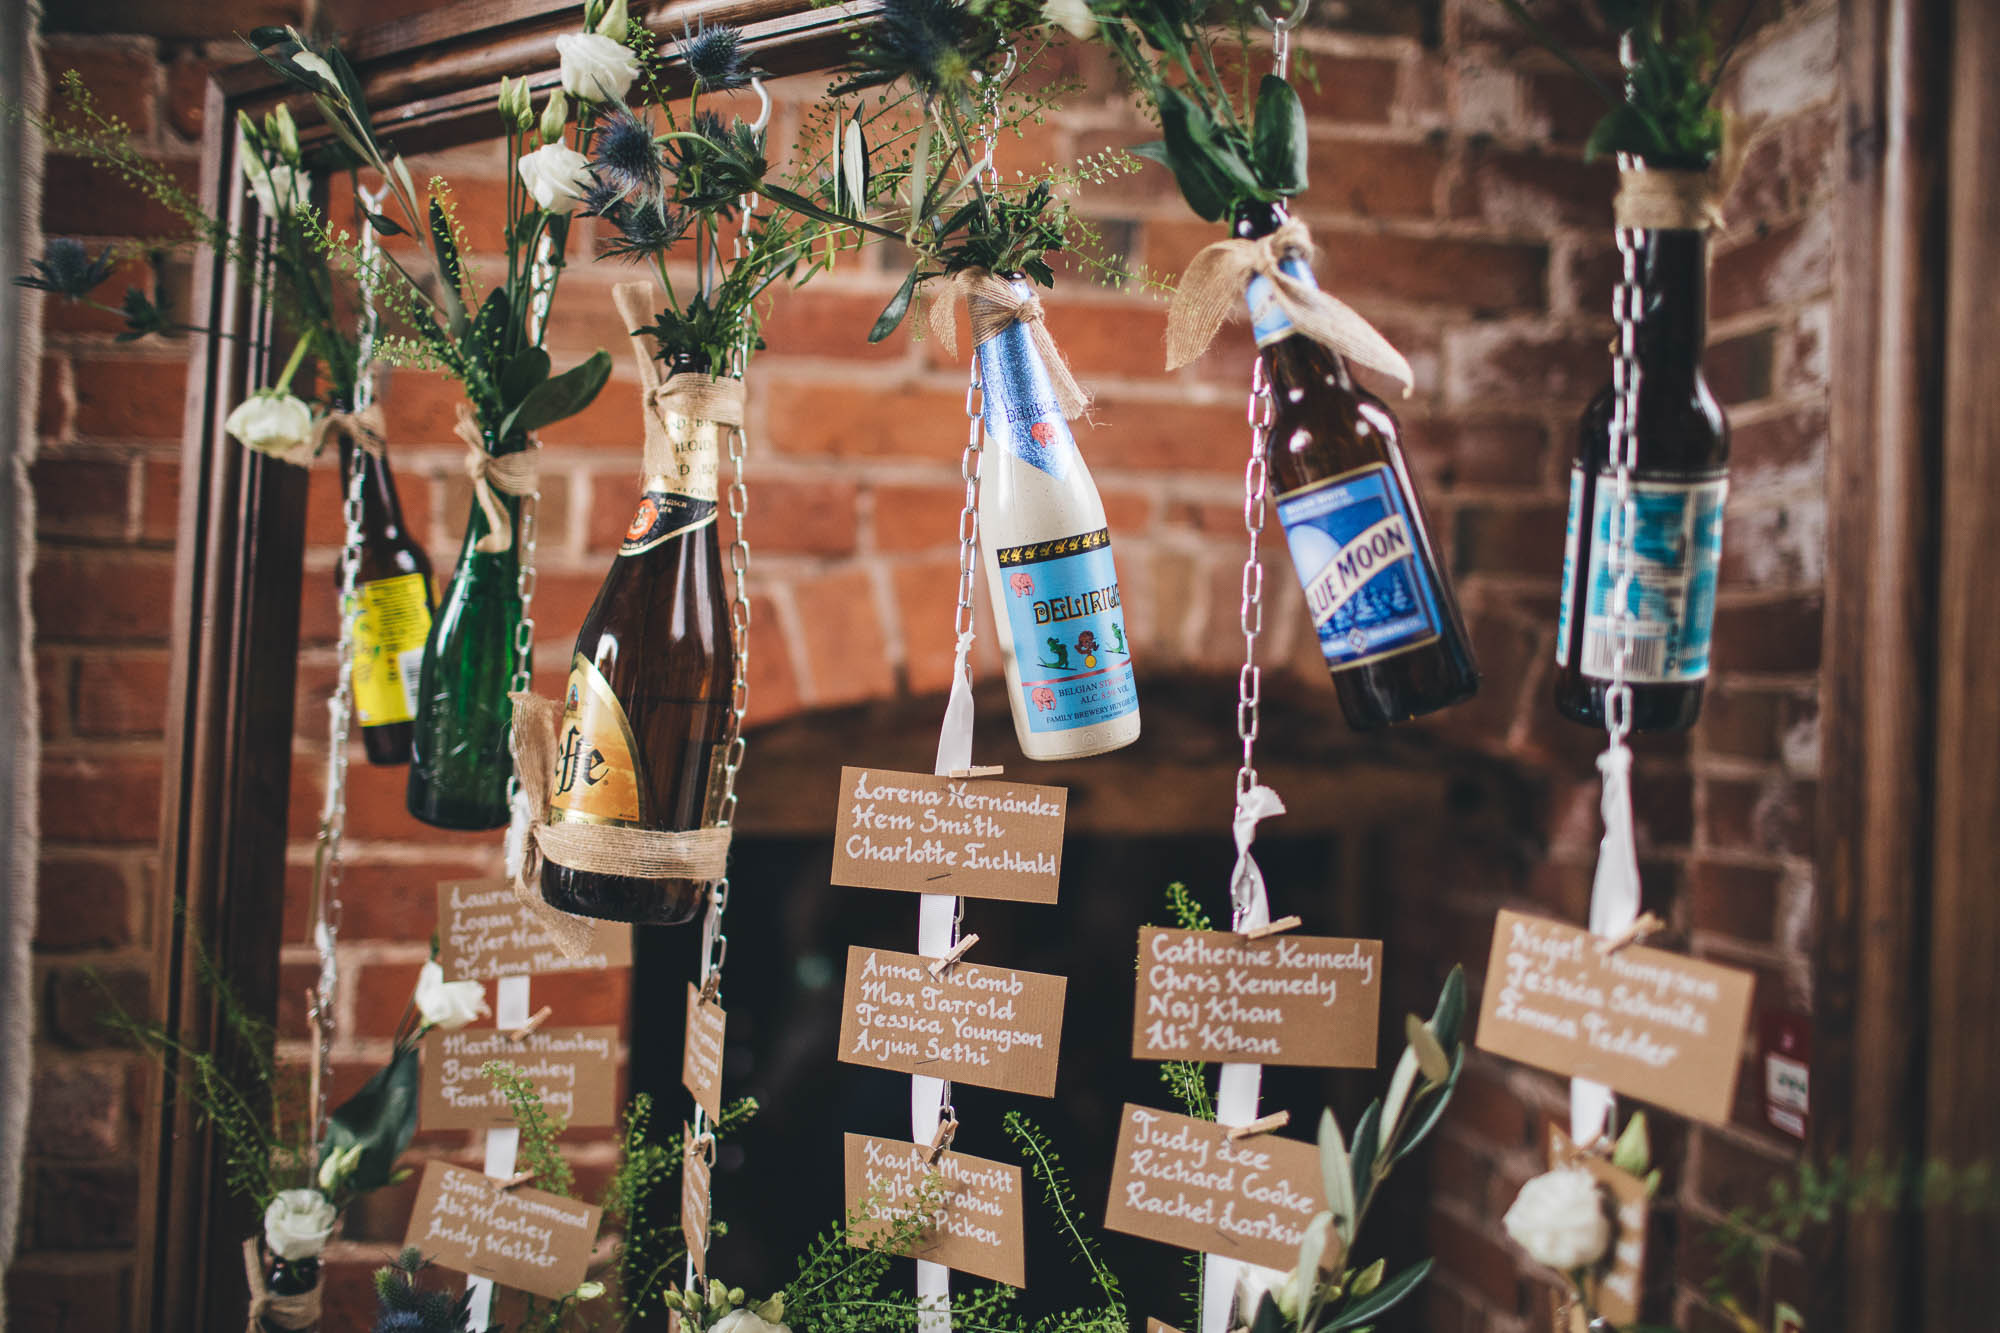 Beer themed decorations at a wedding